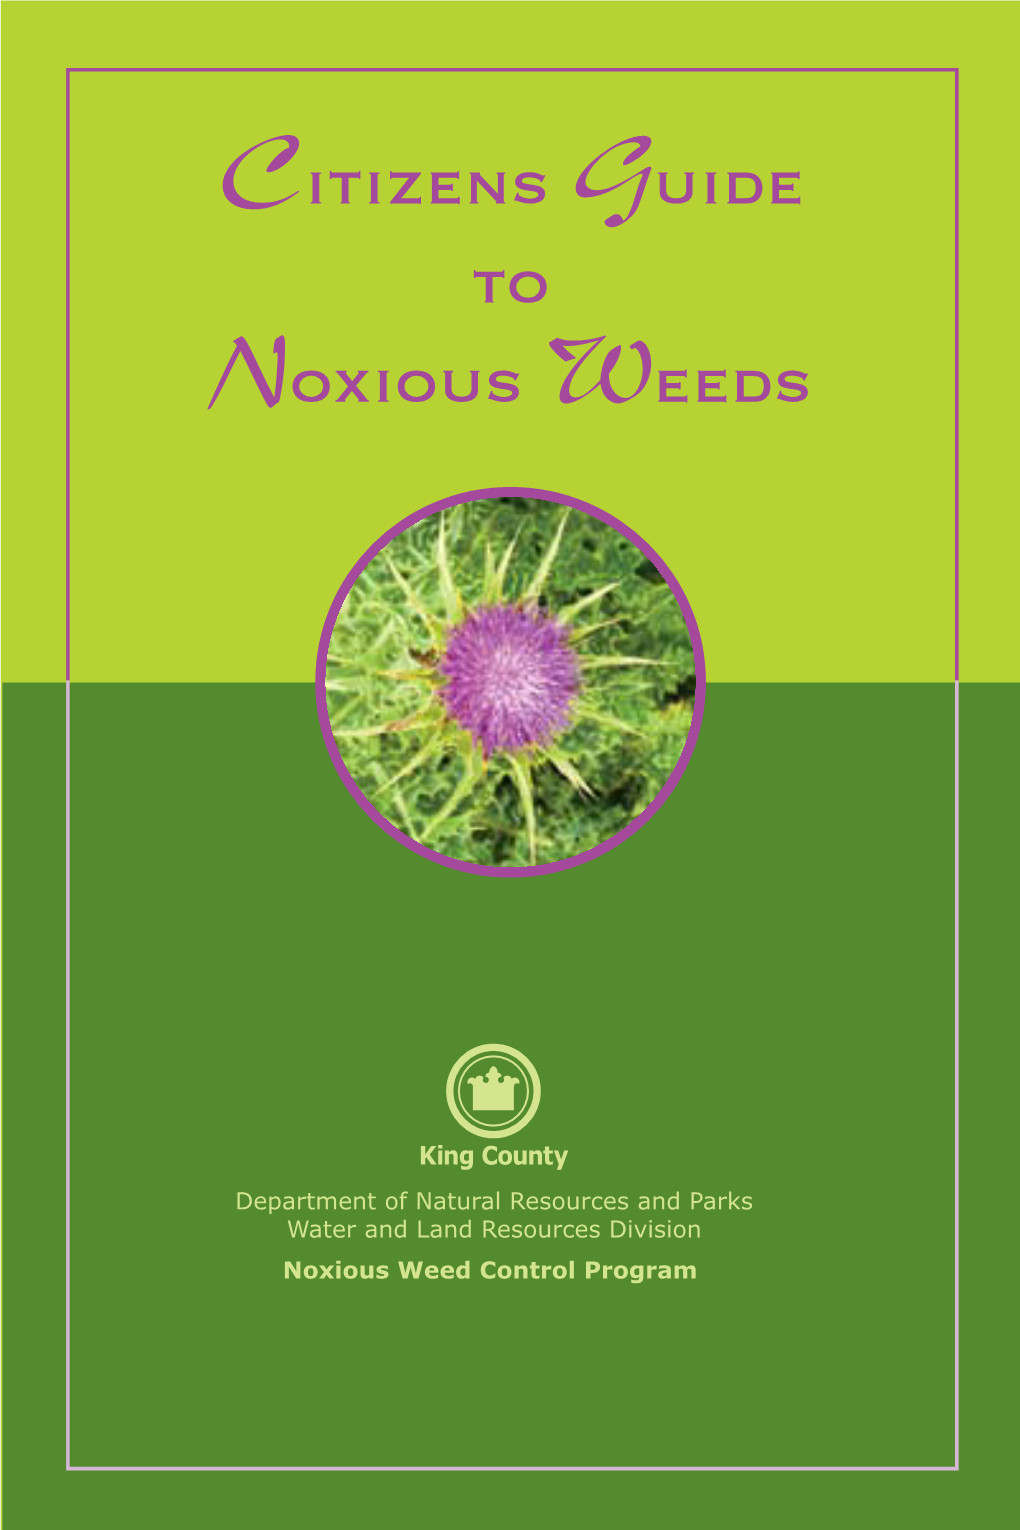 Citizens Guide to Noxious Weeds